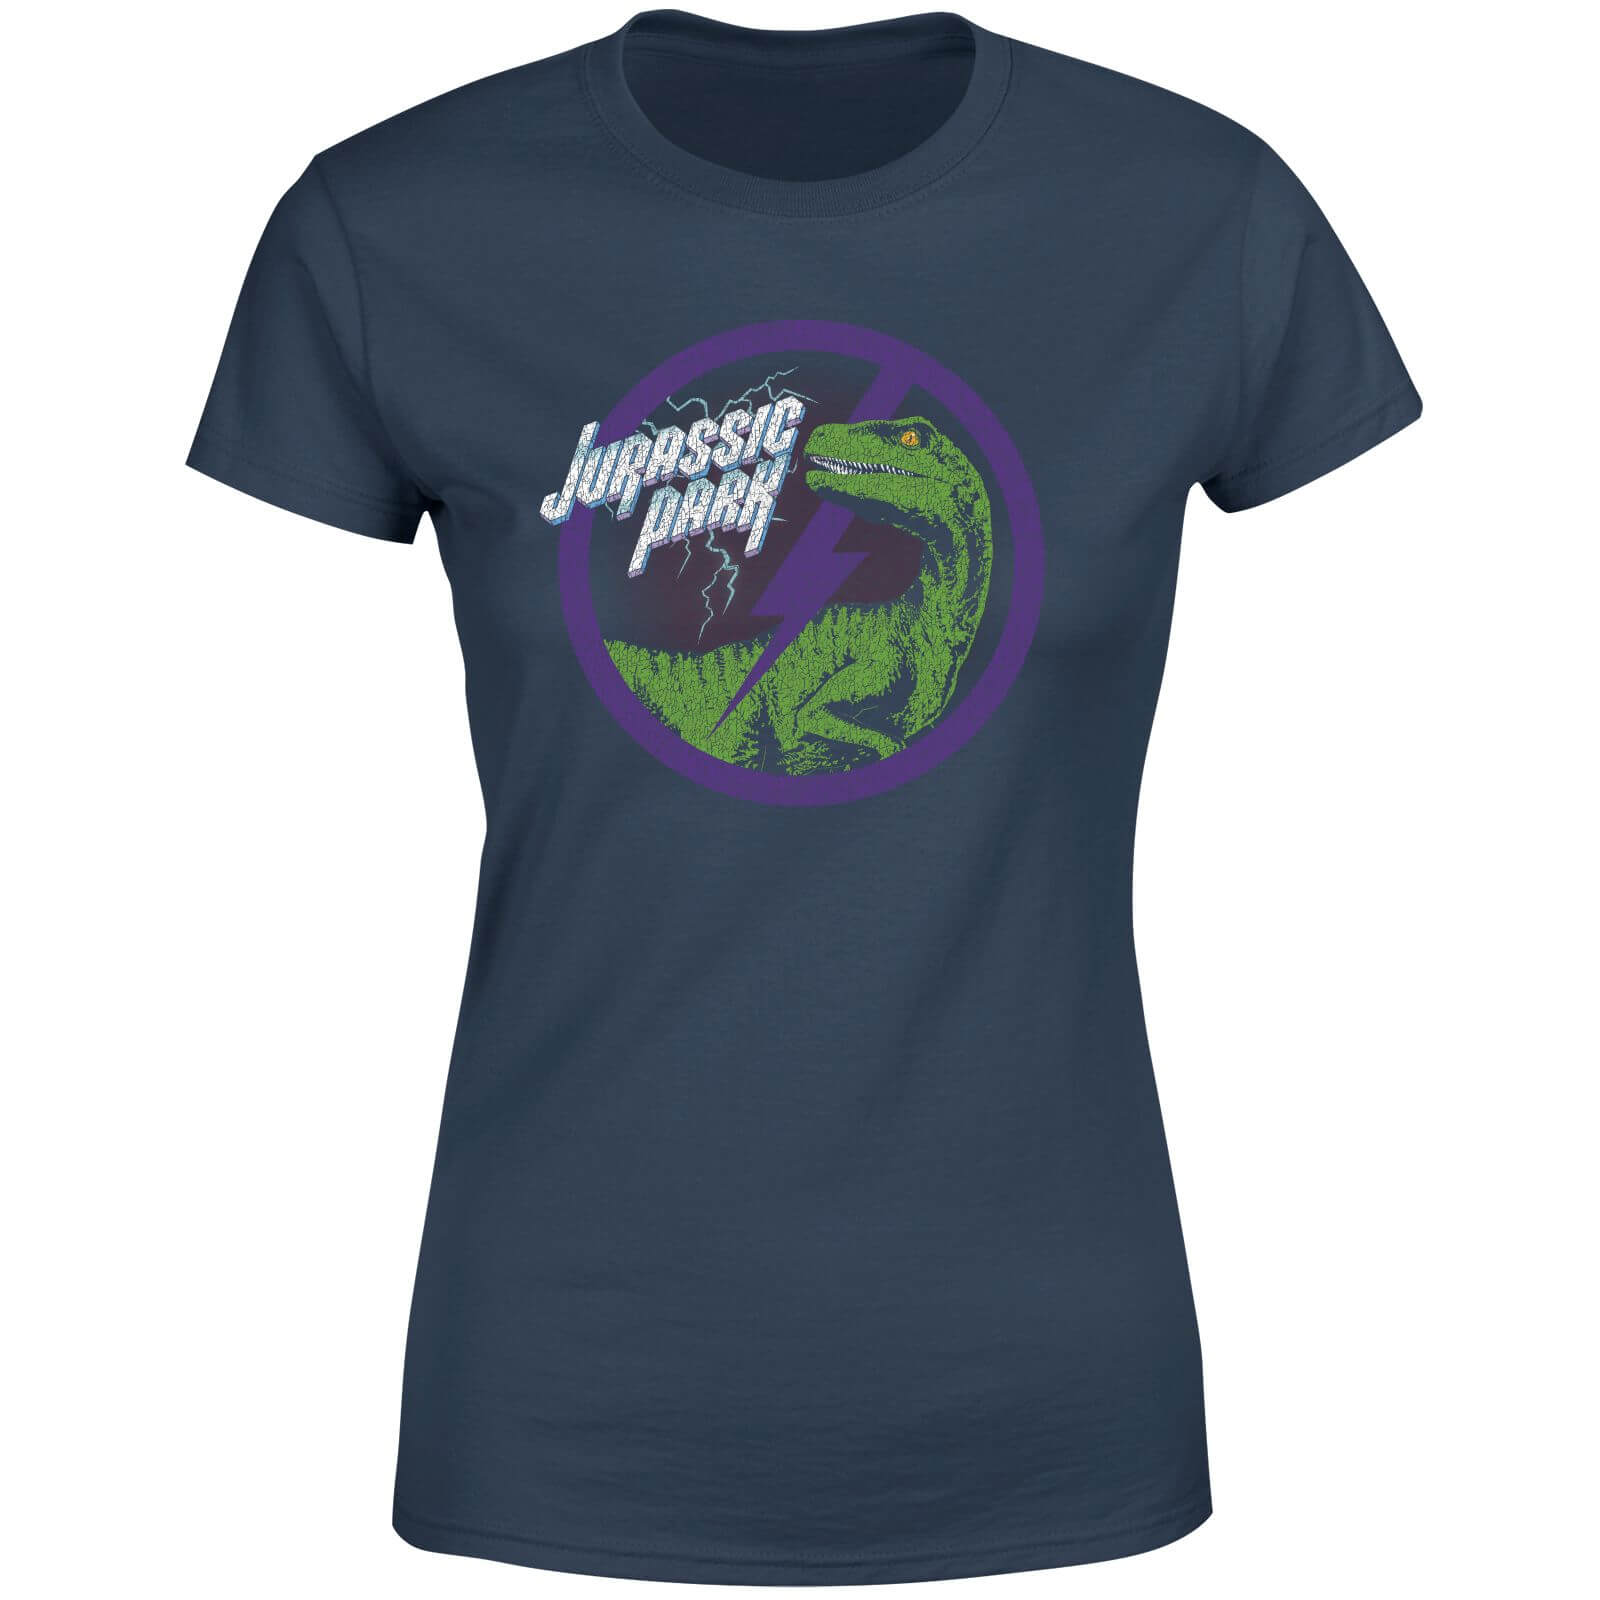 View the best prices for: jurassic park raptor bolt womens t-shirt